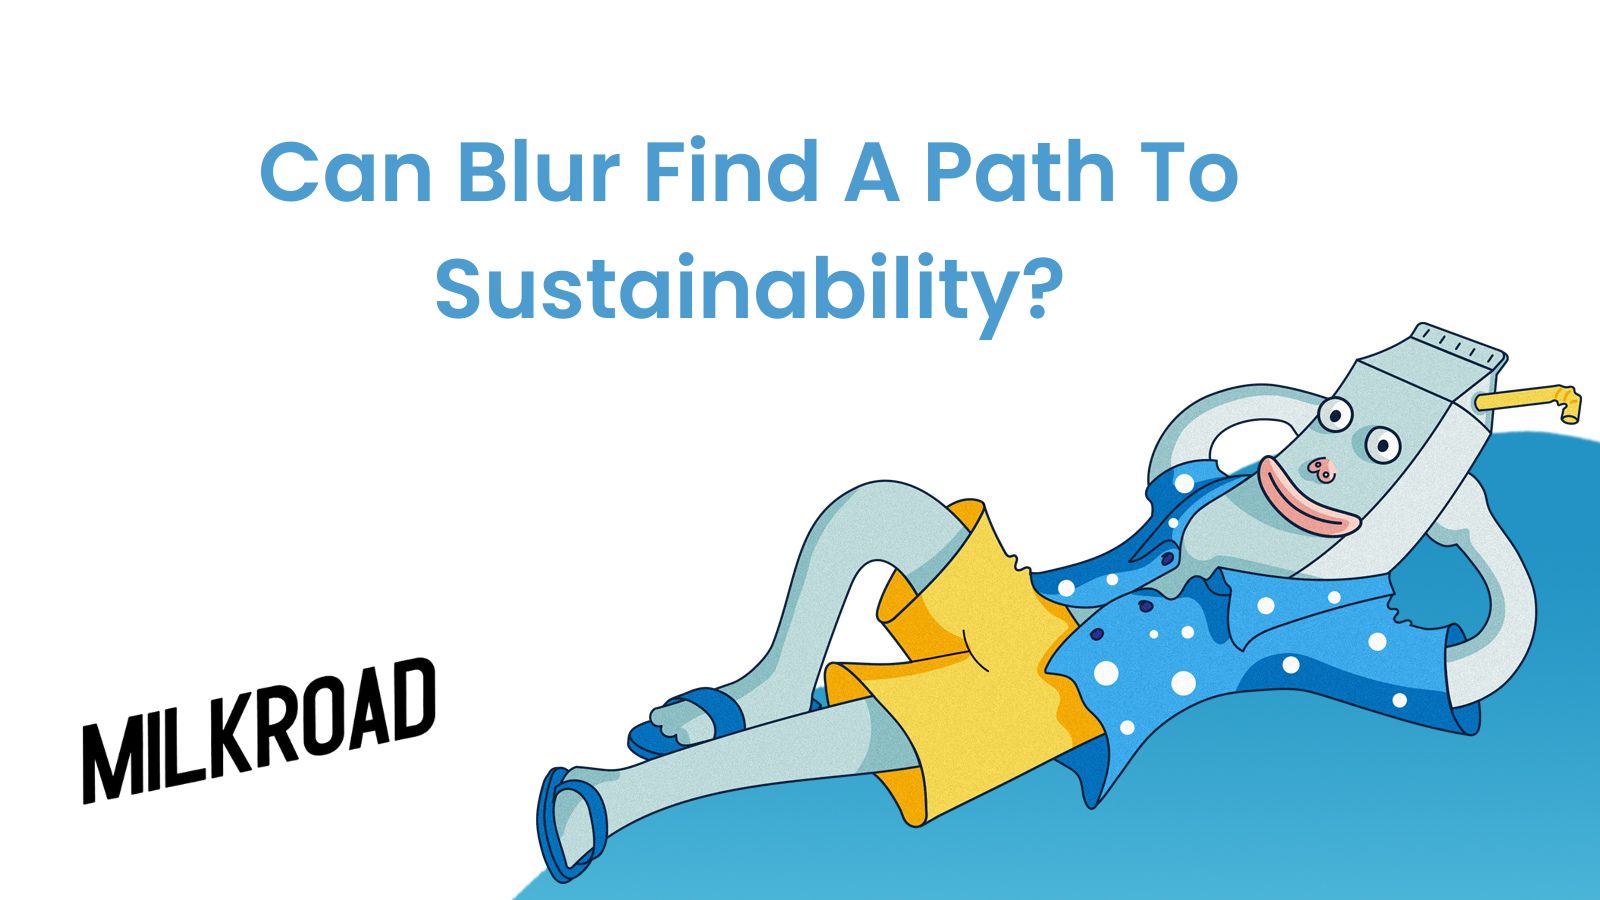 Can Blur Find a Path To Sustainability?